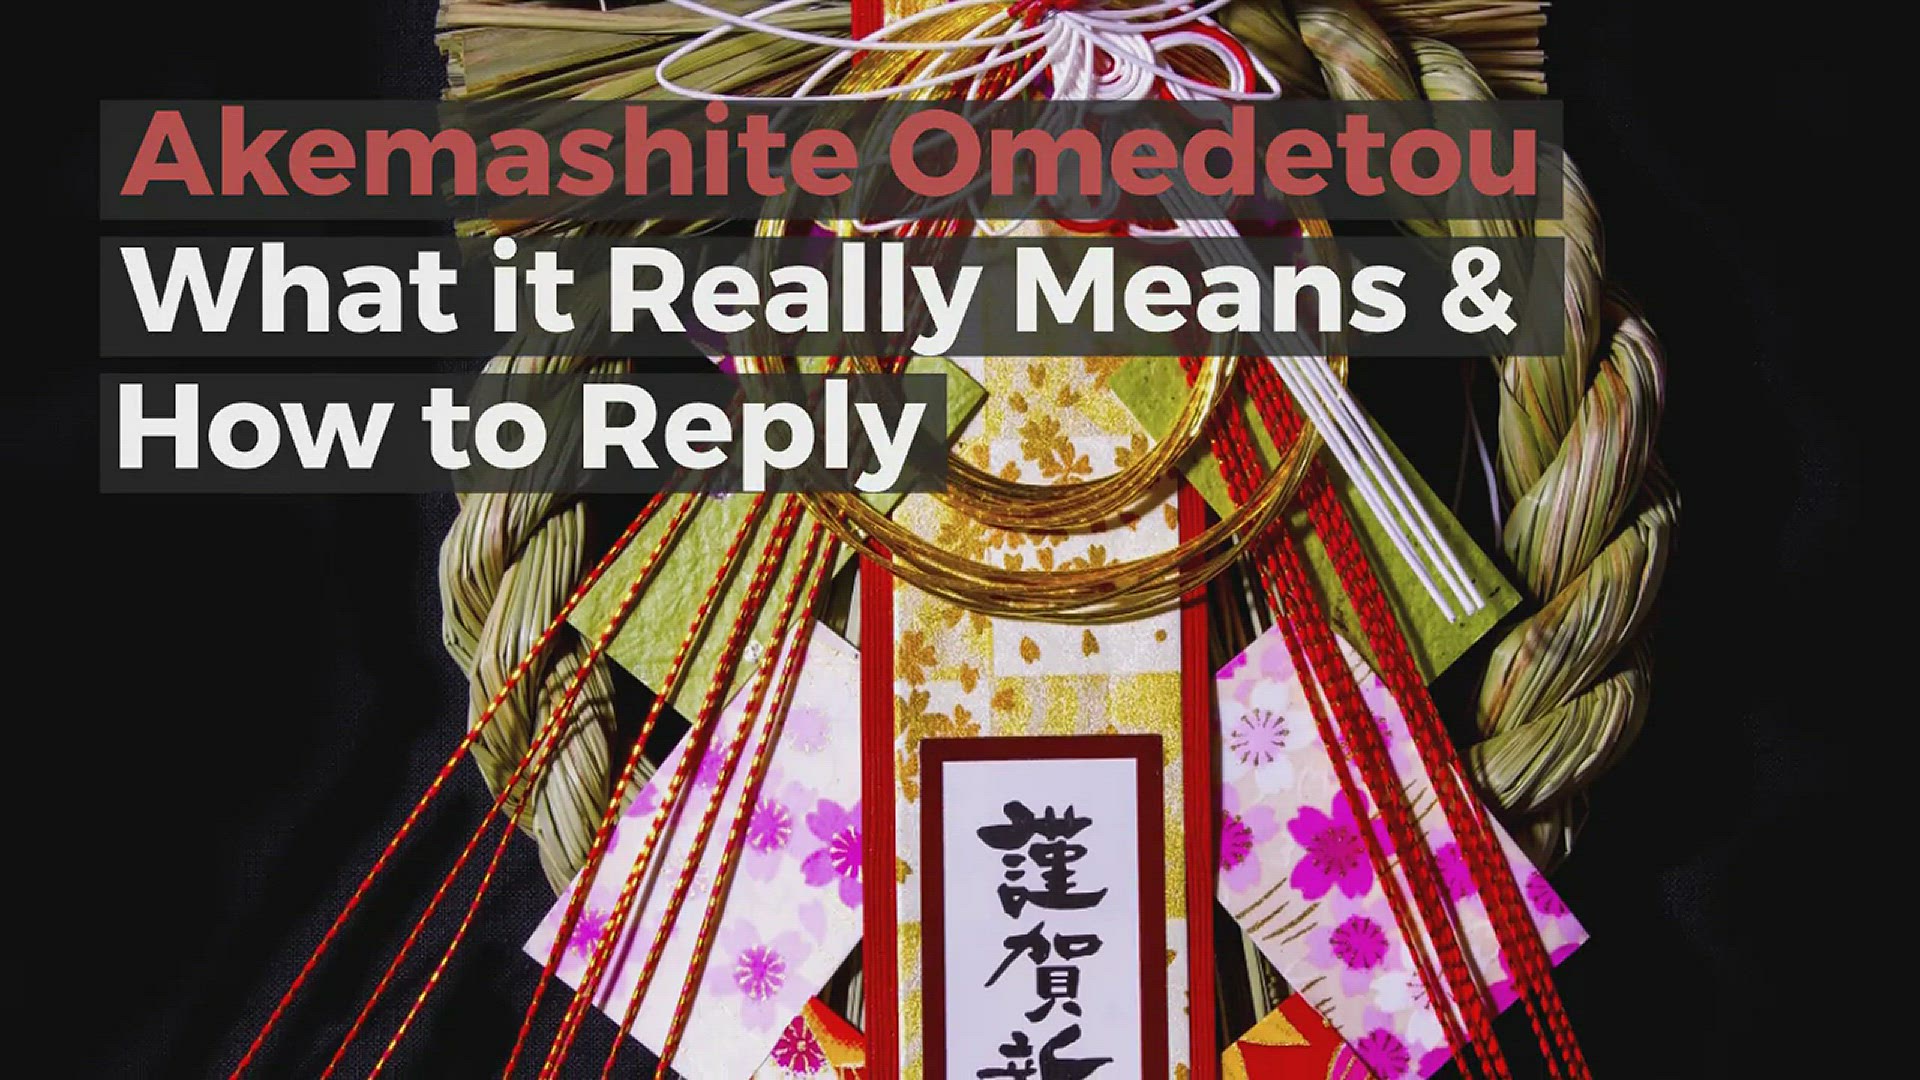 'Video thumbnail for Akemashite Omedetou – What It Really Means & How To Reply'